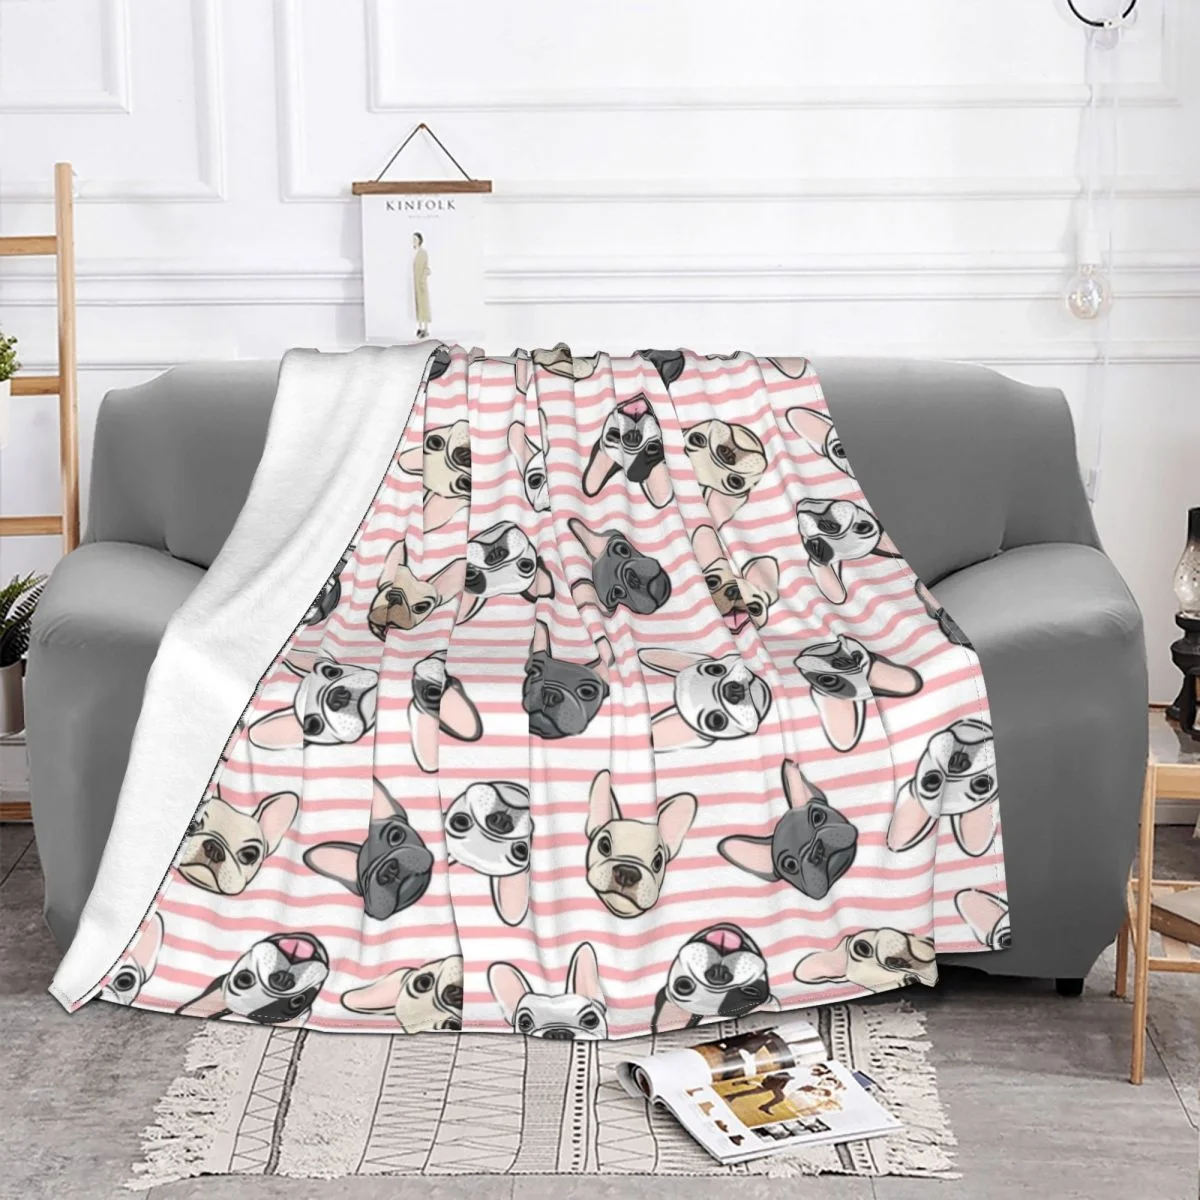 

All The Frenchies Pink Stripes French Bulldog Dog Blanket Coral Fleece All Season Soft Throw Blanket For Bedding Car Bedspread